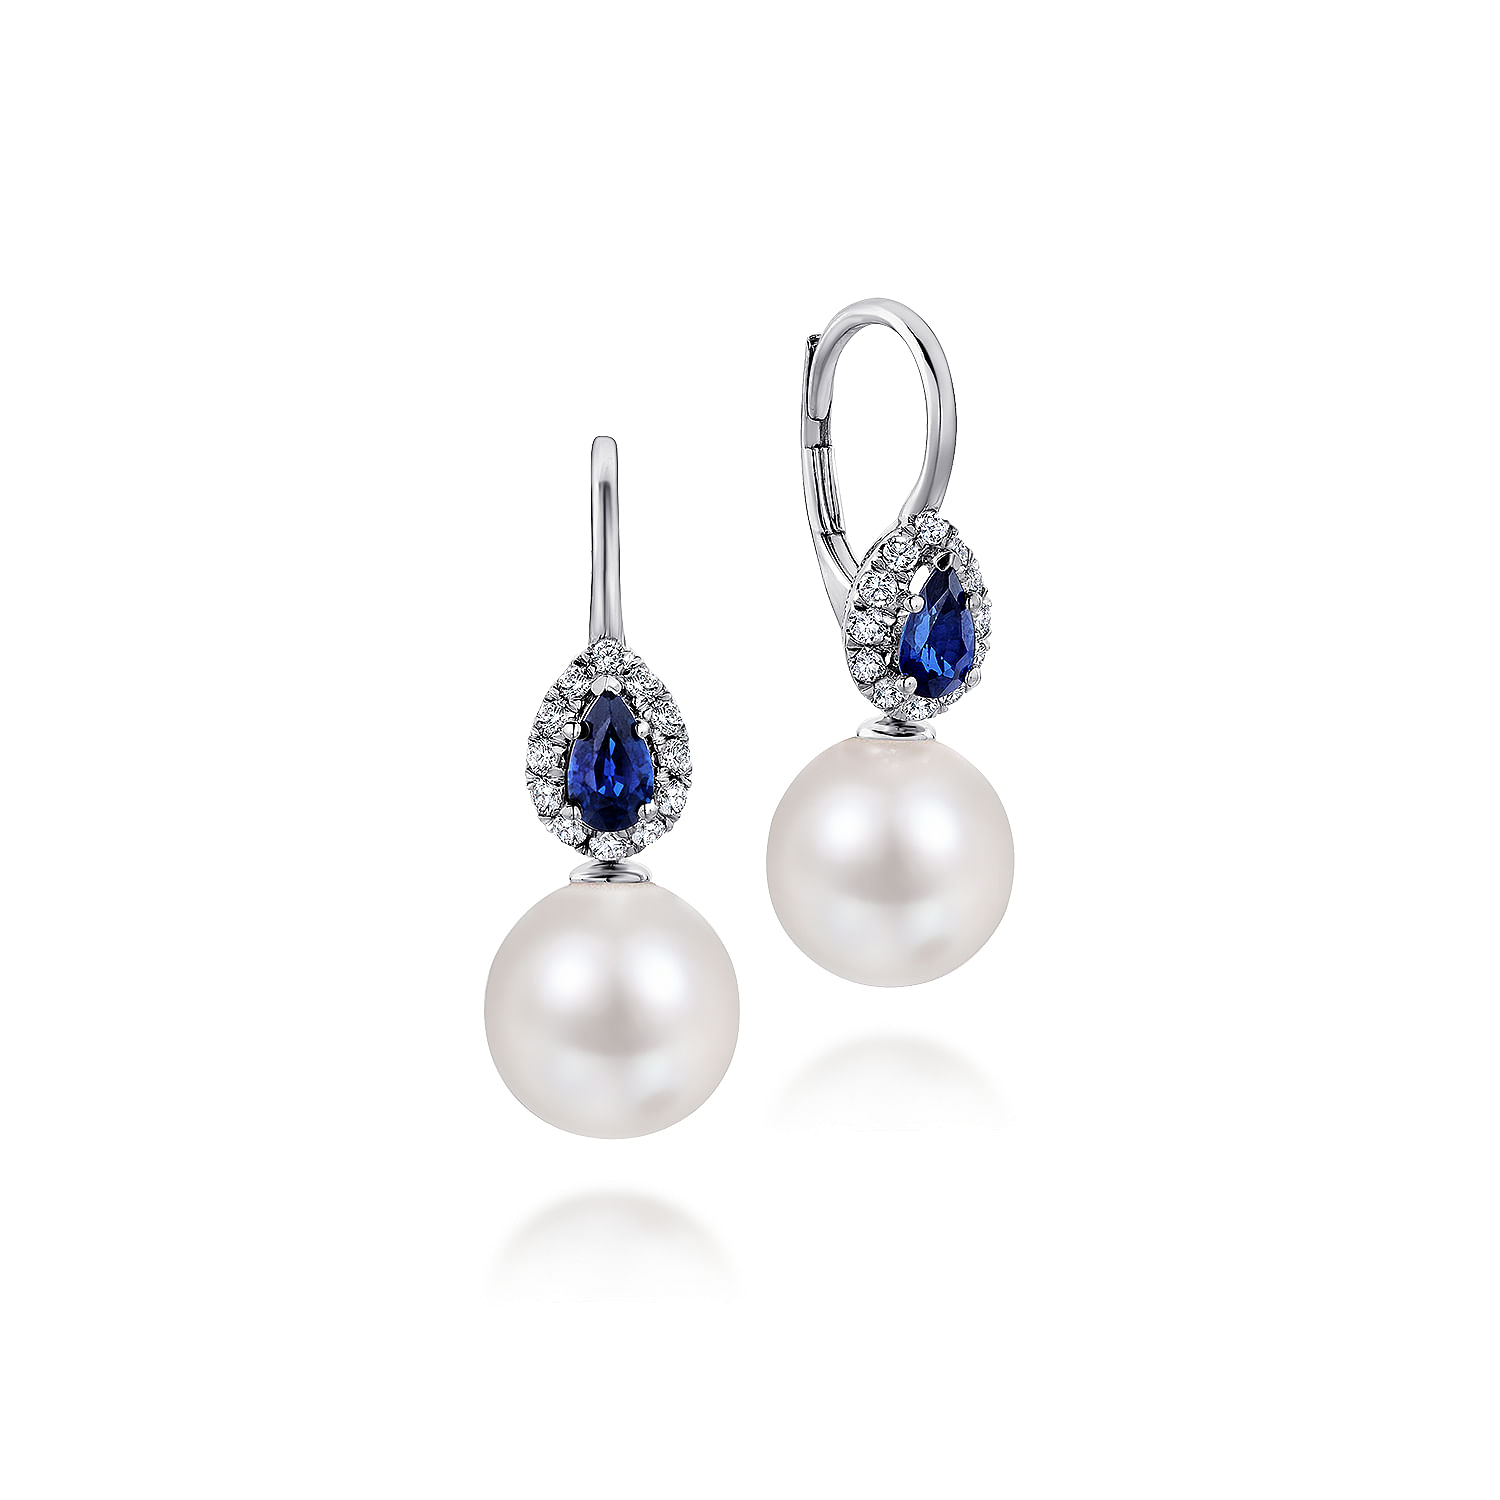 14K White Gold Pear Sapphire and Diamond Halo Earrings with Pearl Drops